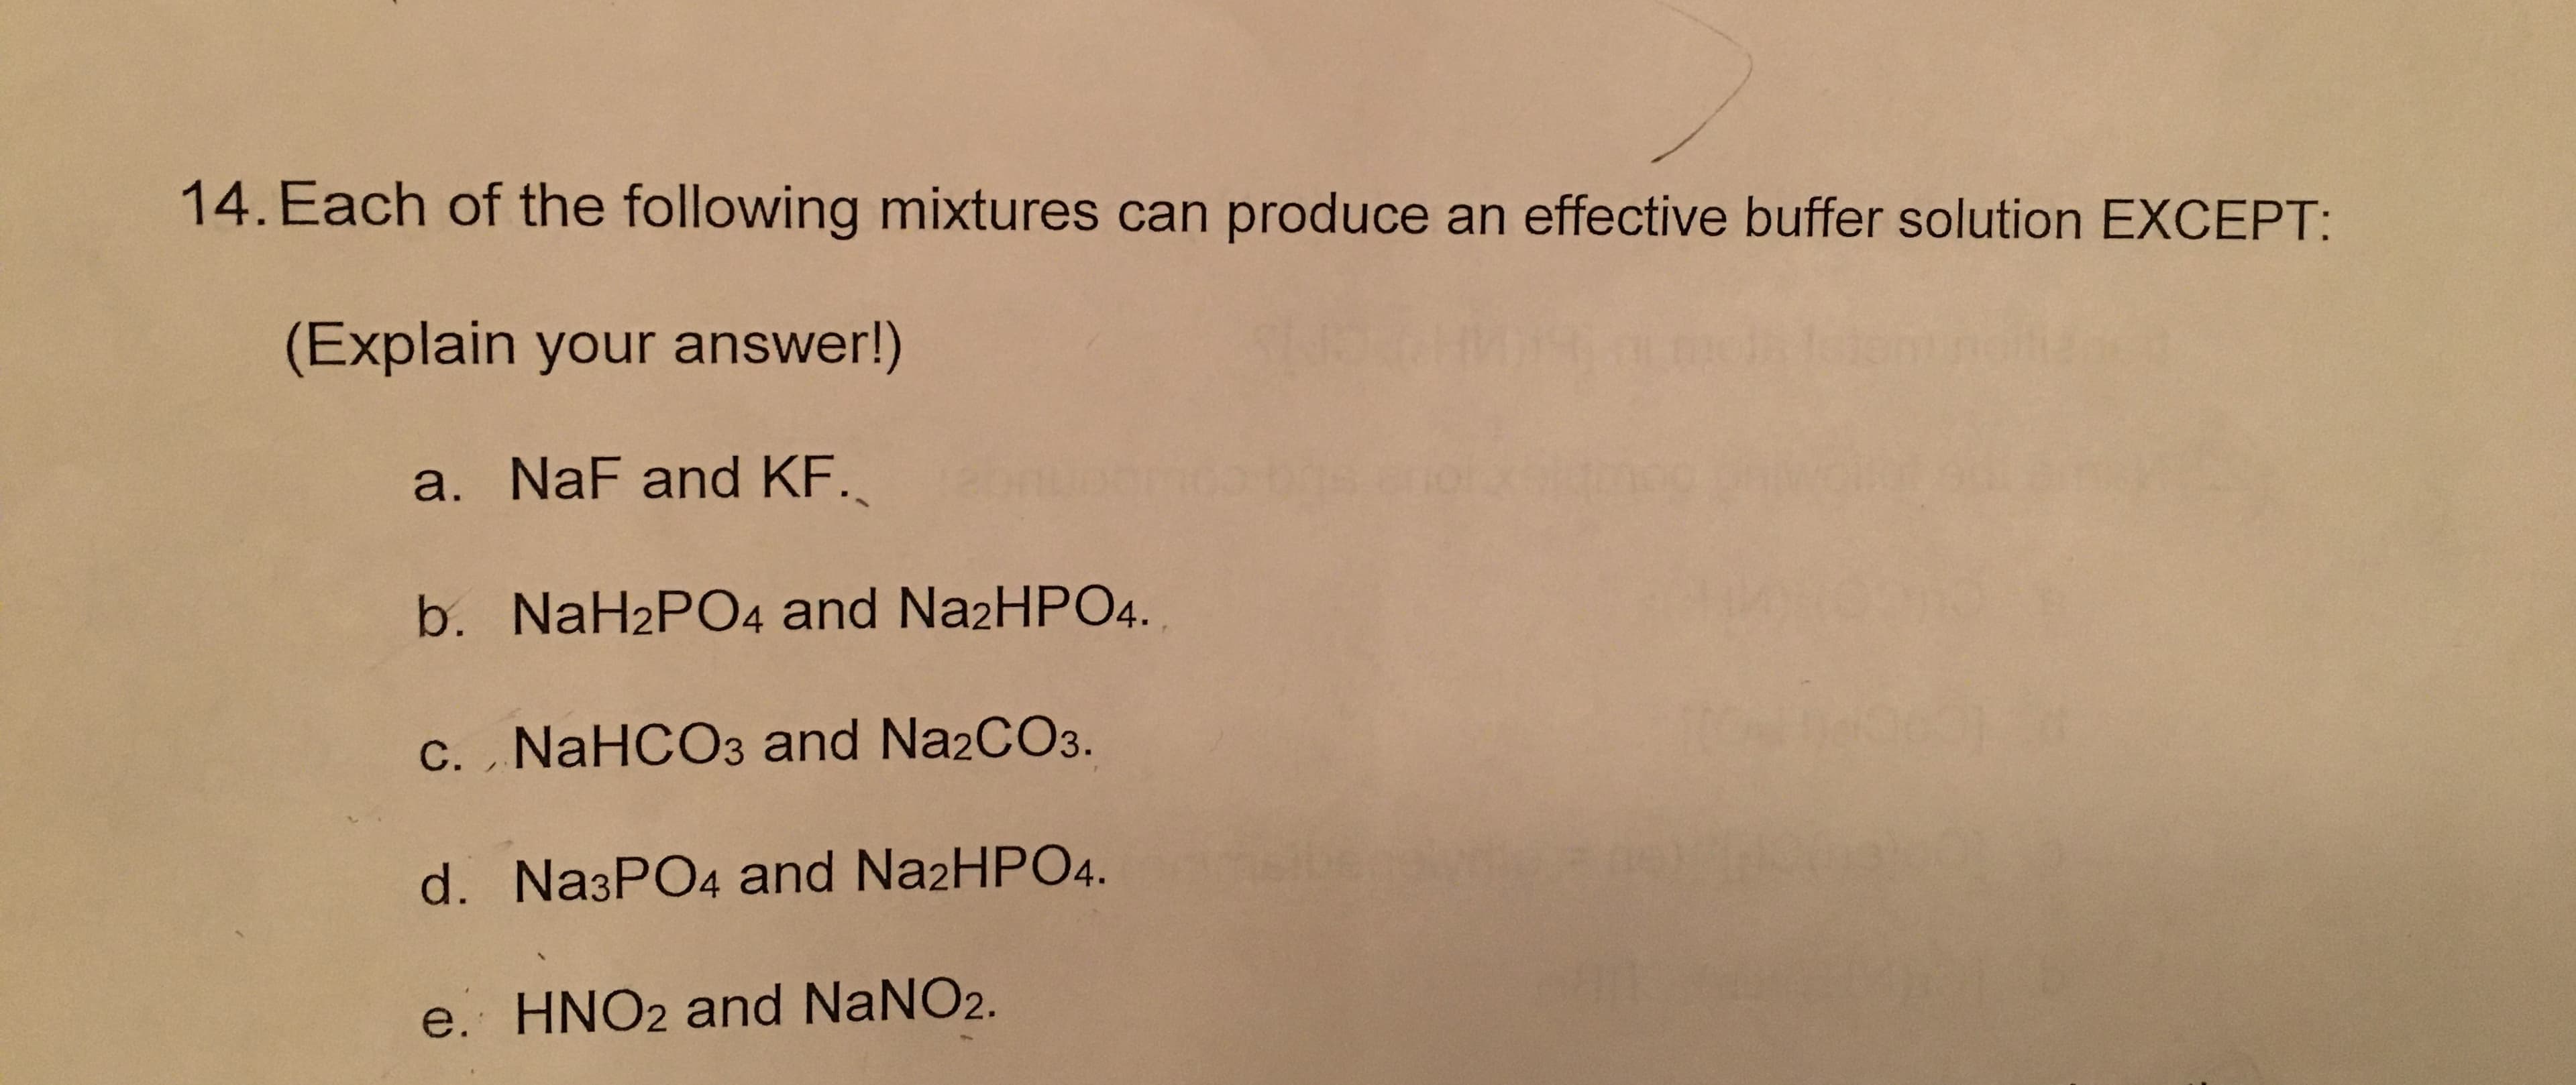 14. Each of the following mixtures can produce an effective buffer solution EXCEPT:
(Explain your answer!)
a. NaF and KF.
b. NaH2PO4 and NazHPO4.
c. NaHCO3 and Na2CO3.
d. Na3PO4 and Na2HPO4.
e. HNO2 and NANO2.
